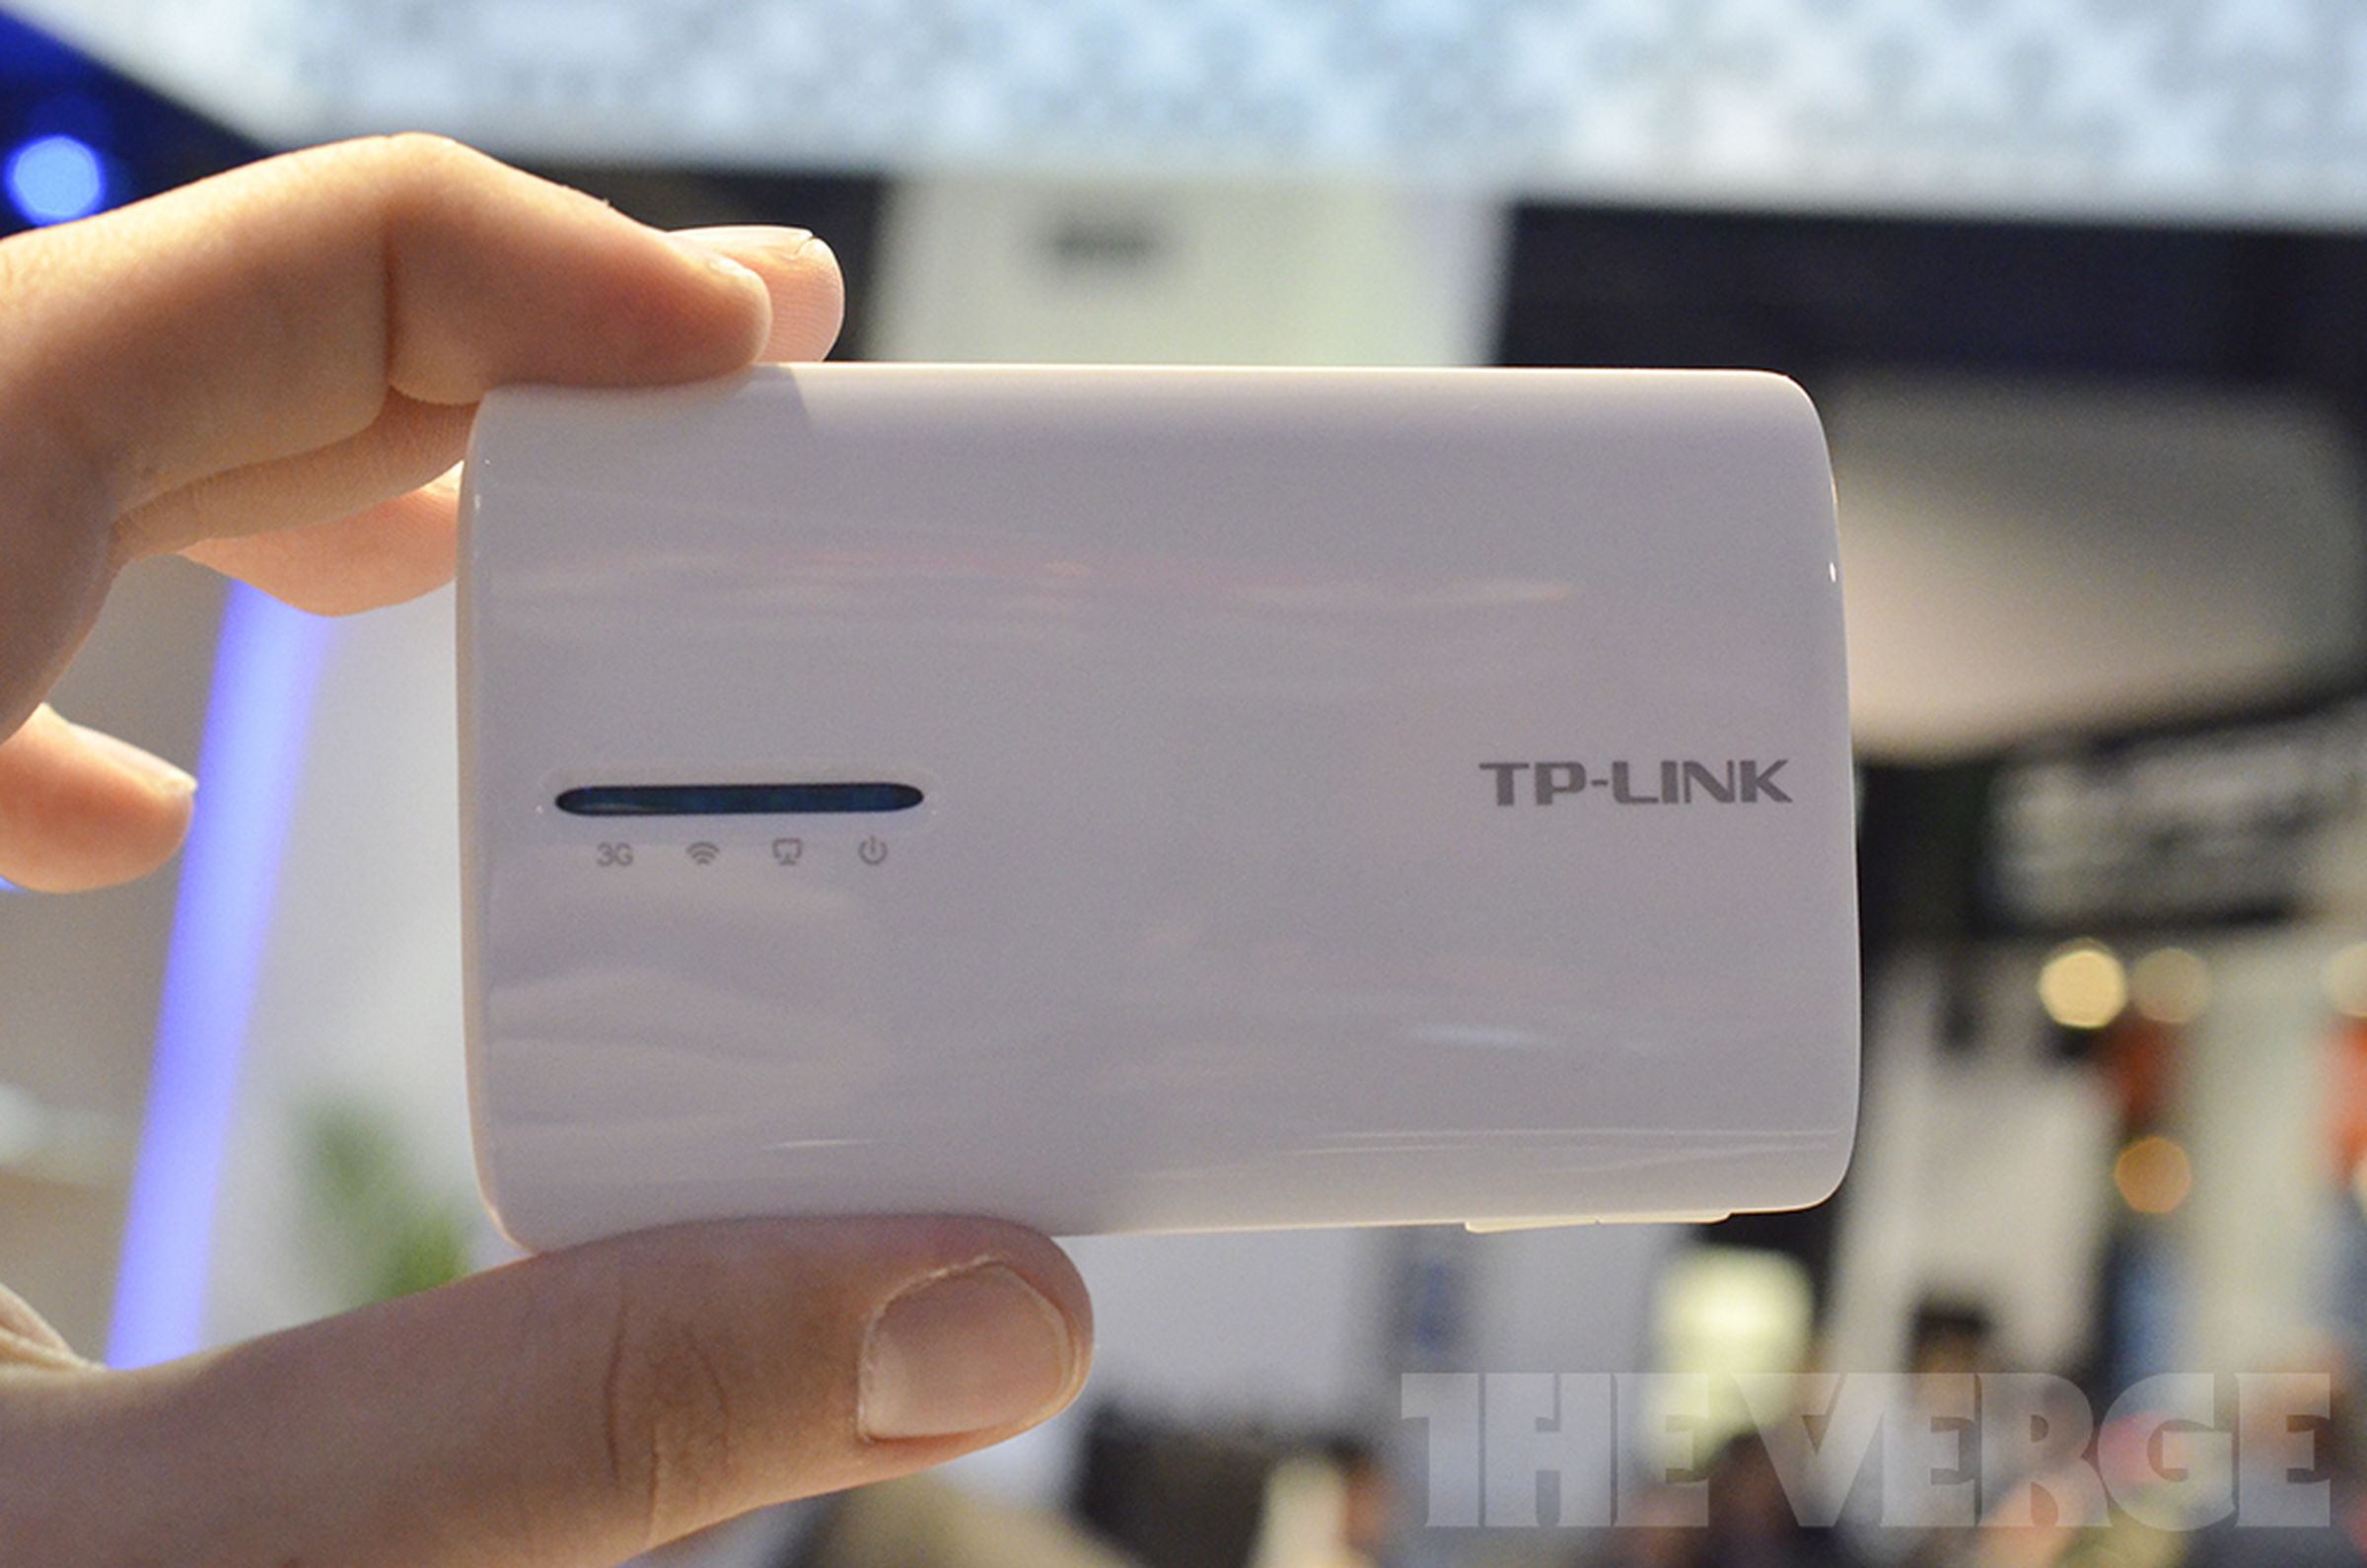 TP-Link Portable 3G/3.75G Battery Powered Wireless N Router (hands-on)